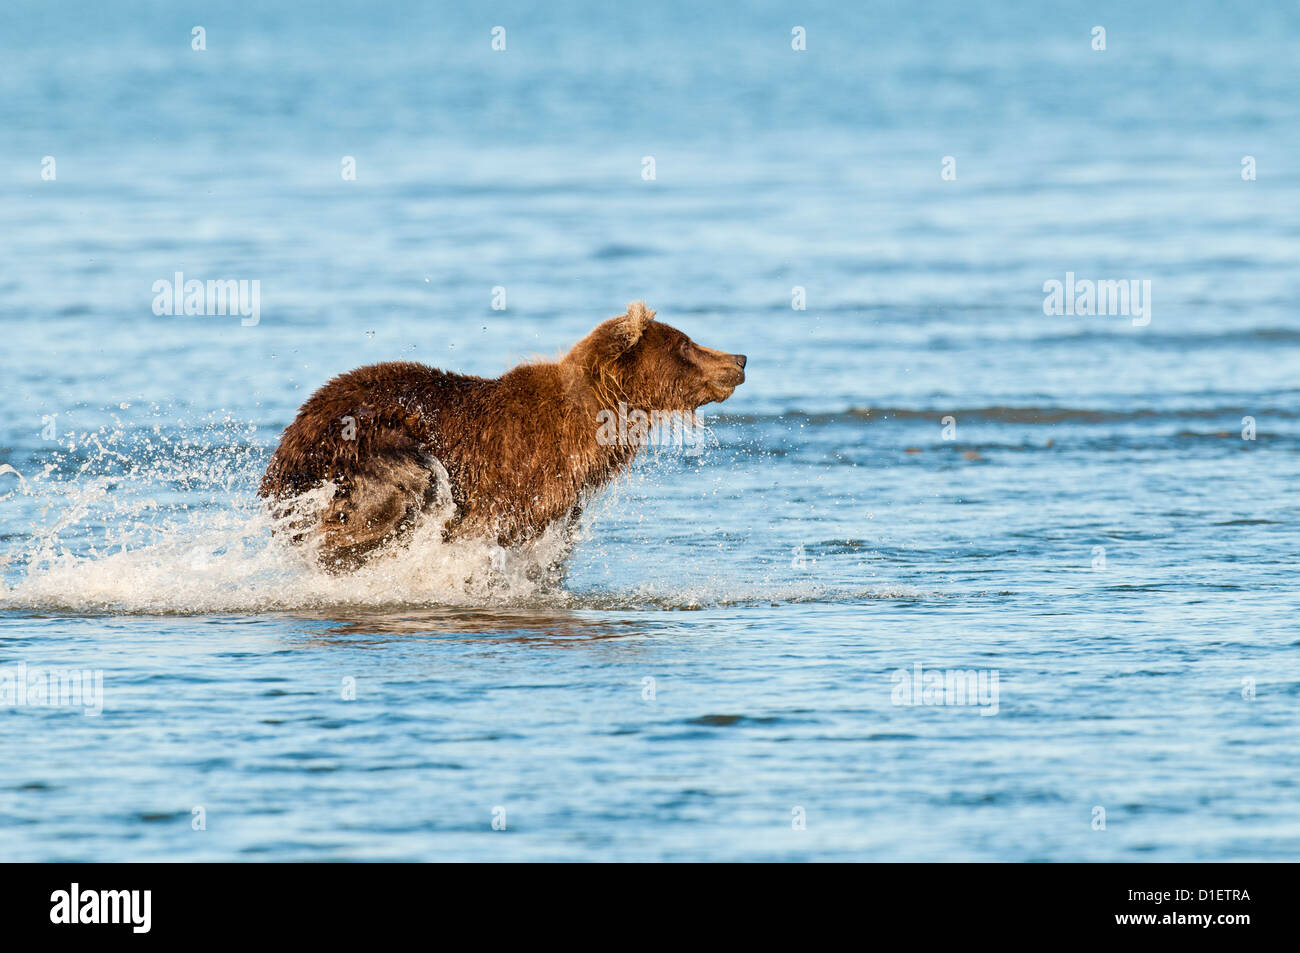 Ours brun chasing salmon ; Lake Clark National Park, AK Banque D'Images